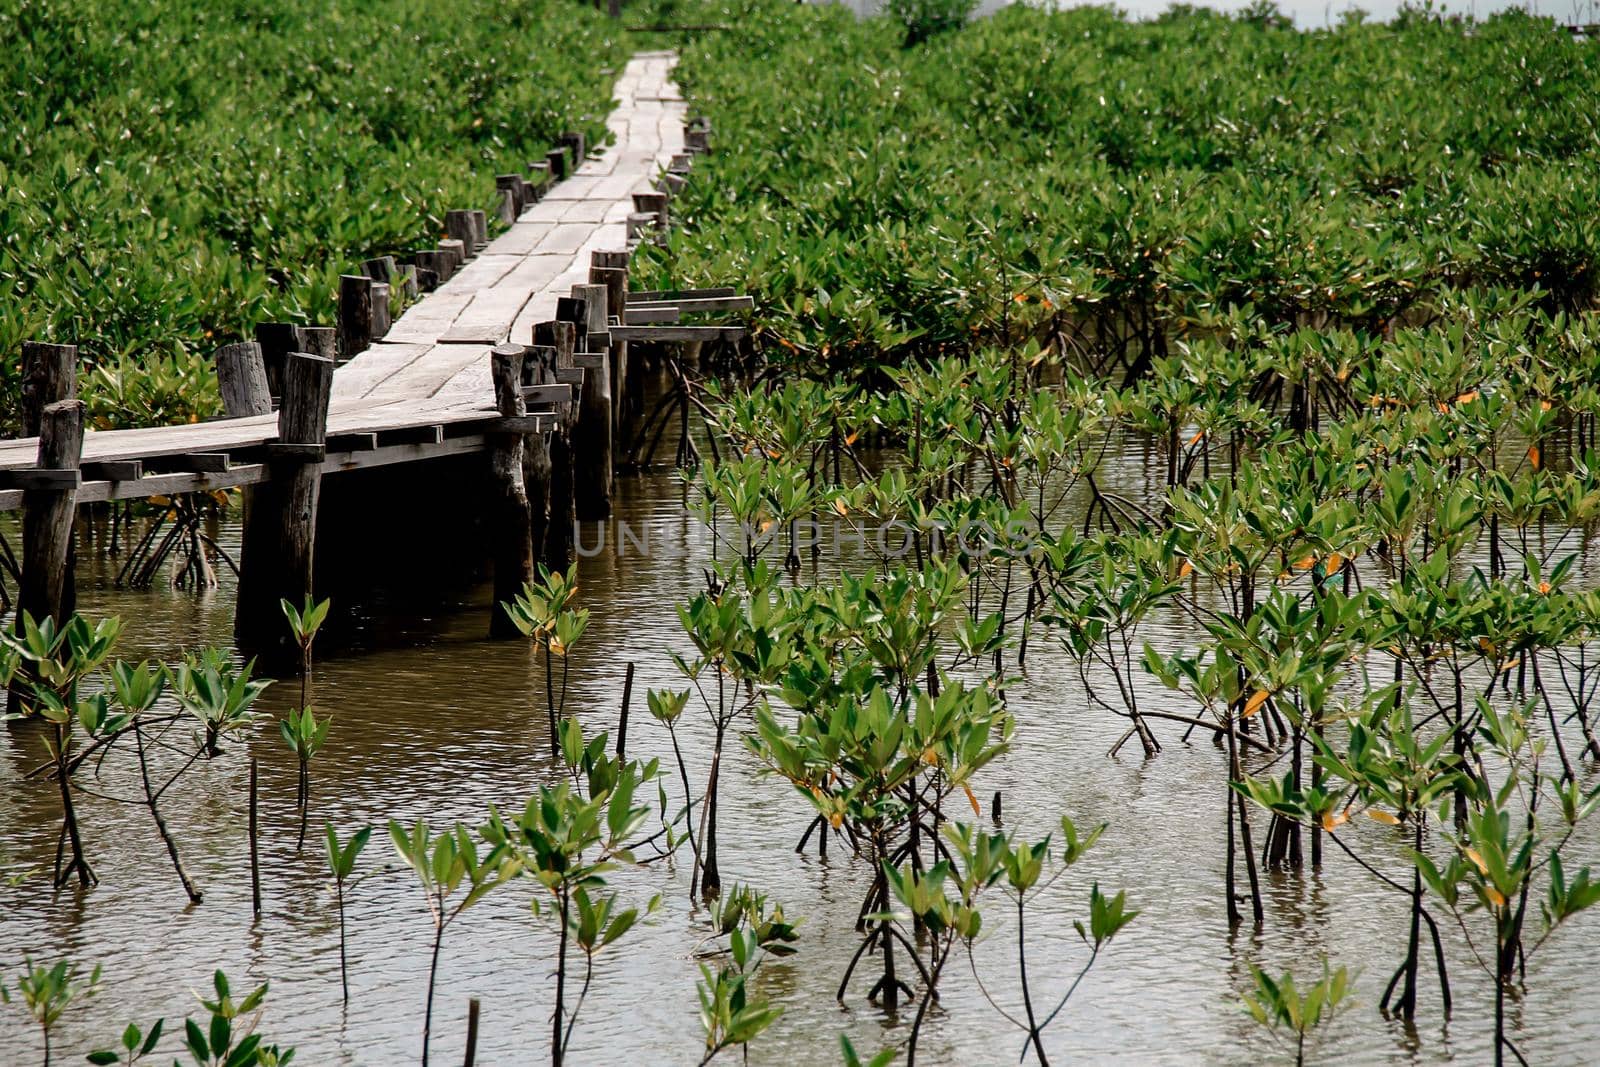 Mangrove conservation area where seedlings are replanted by Sonnet15